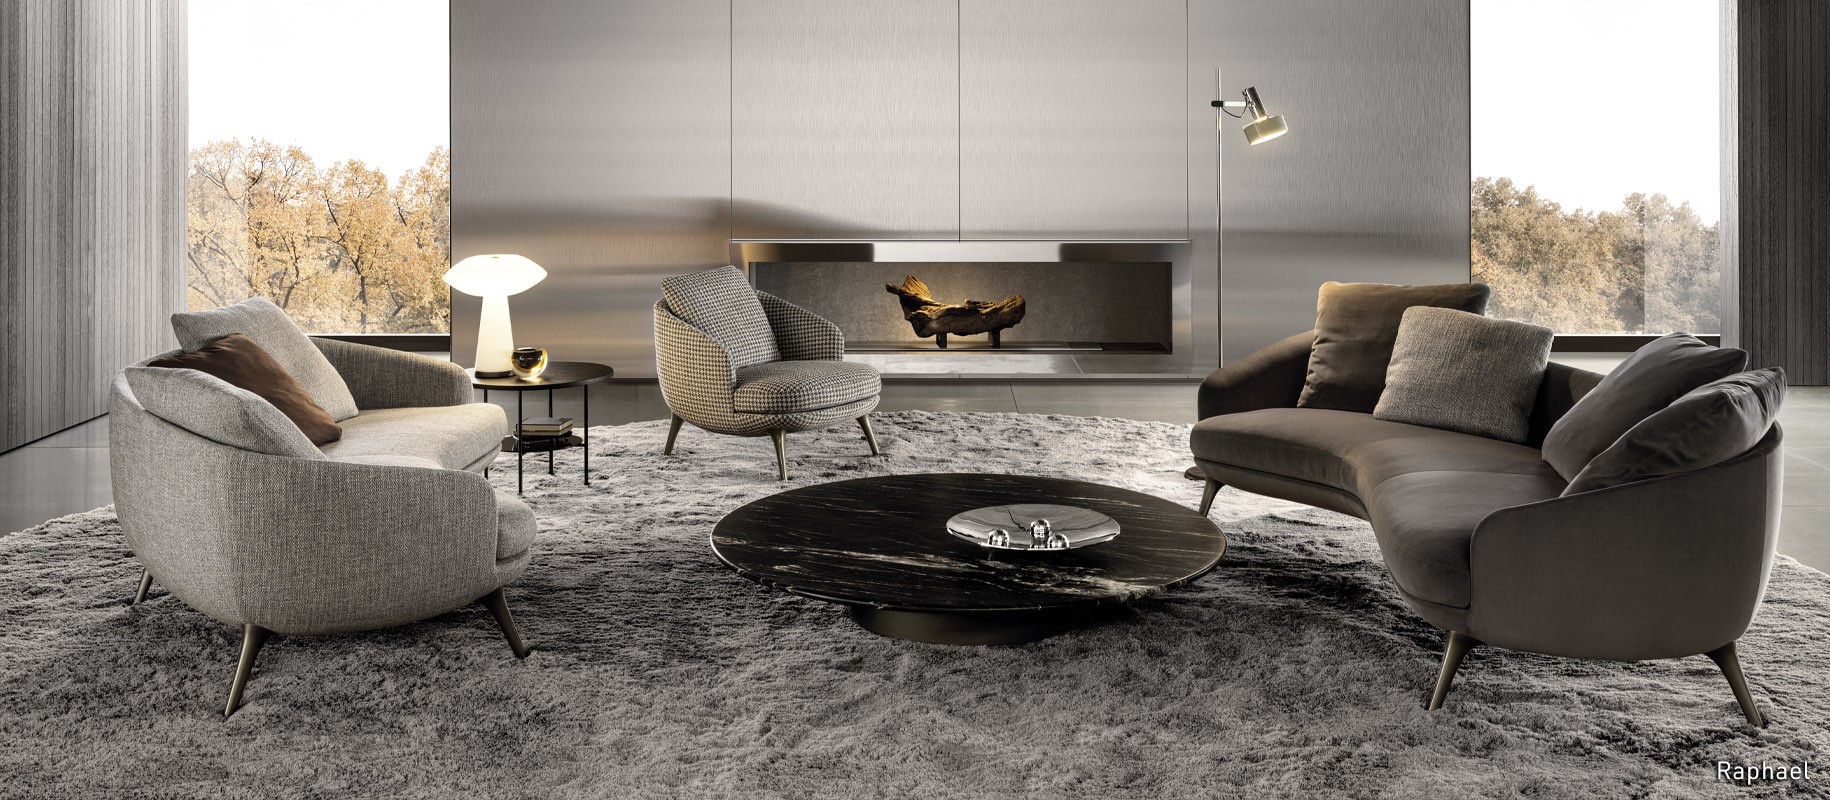 In 2023, the Gamfratesi duo created the <strong>Raphael</strong> family of seats: compact furnishing pieces with refined tailoring that effortlessly become the protagonists of the space, expressing a new concept of designing the living area.